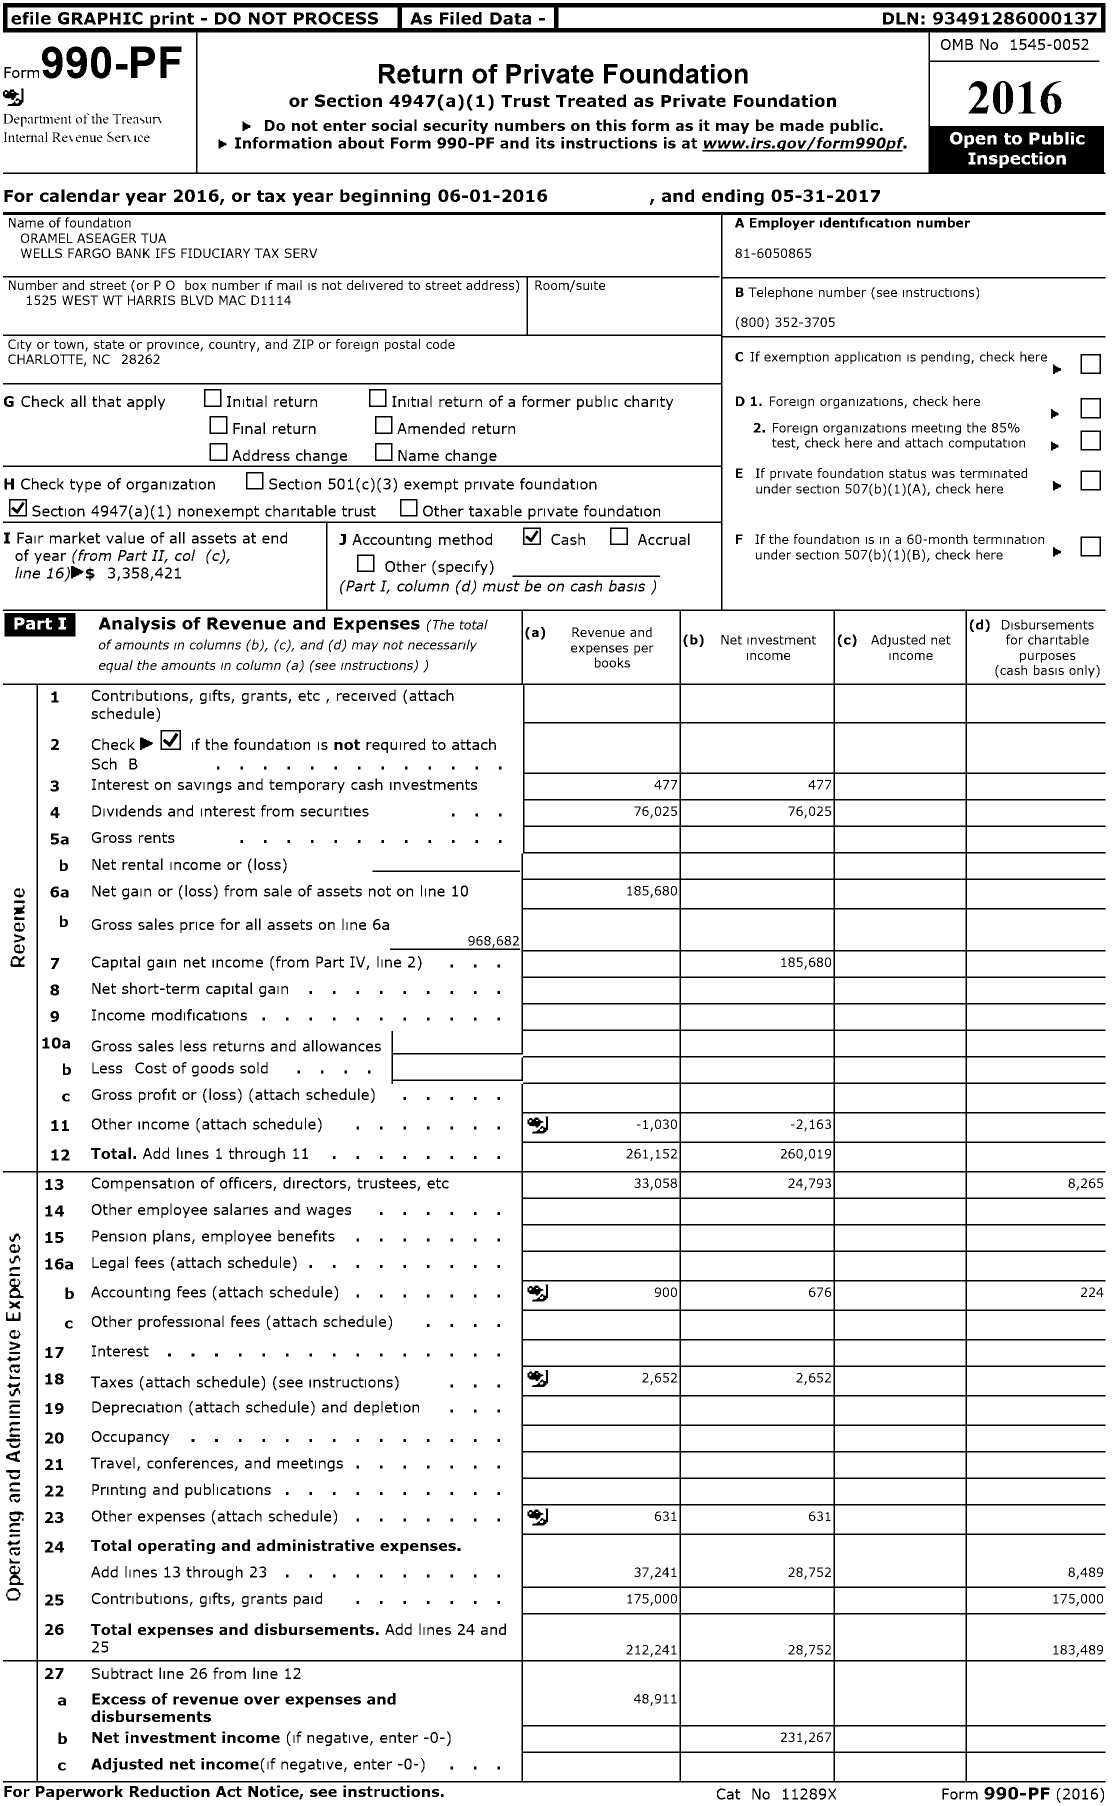 Image of first page of 2016 Form 990PF for Oramel Aseager Tua Wells Fargo Bank Ifs Fiduciary Tax Serv